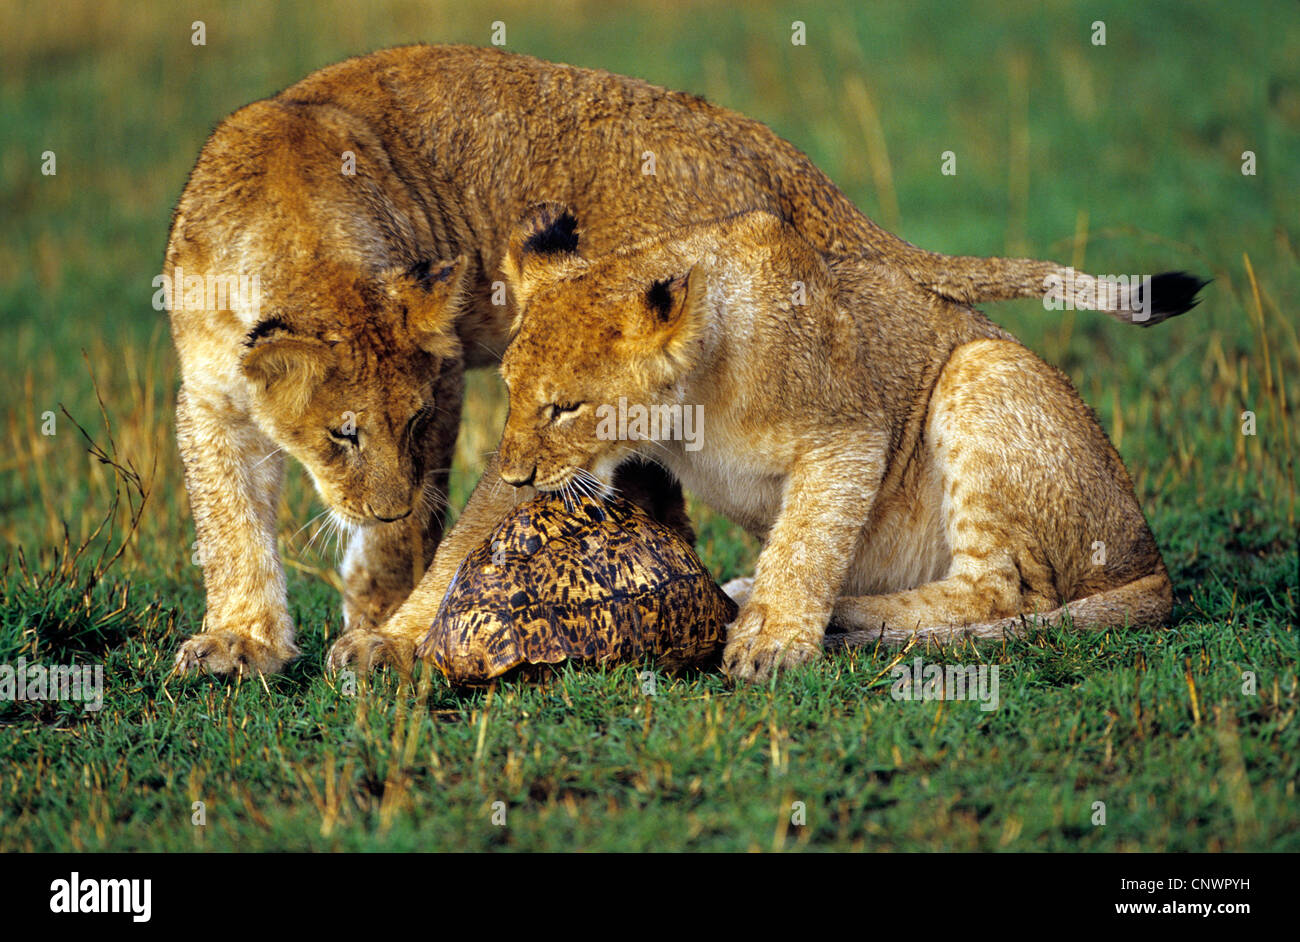 lion (Panthera leo), young lions playing with a turtle Stock Photo